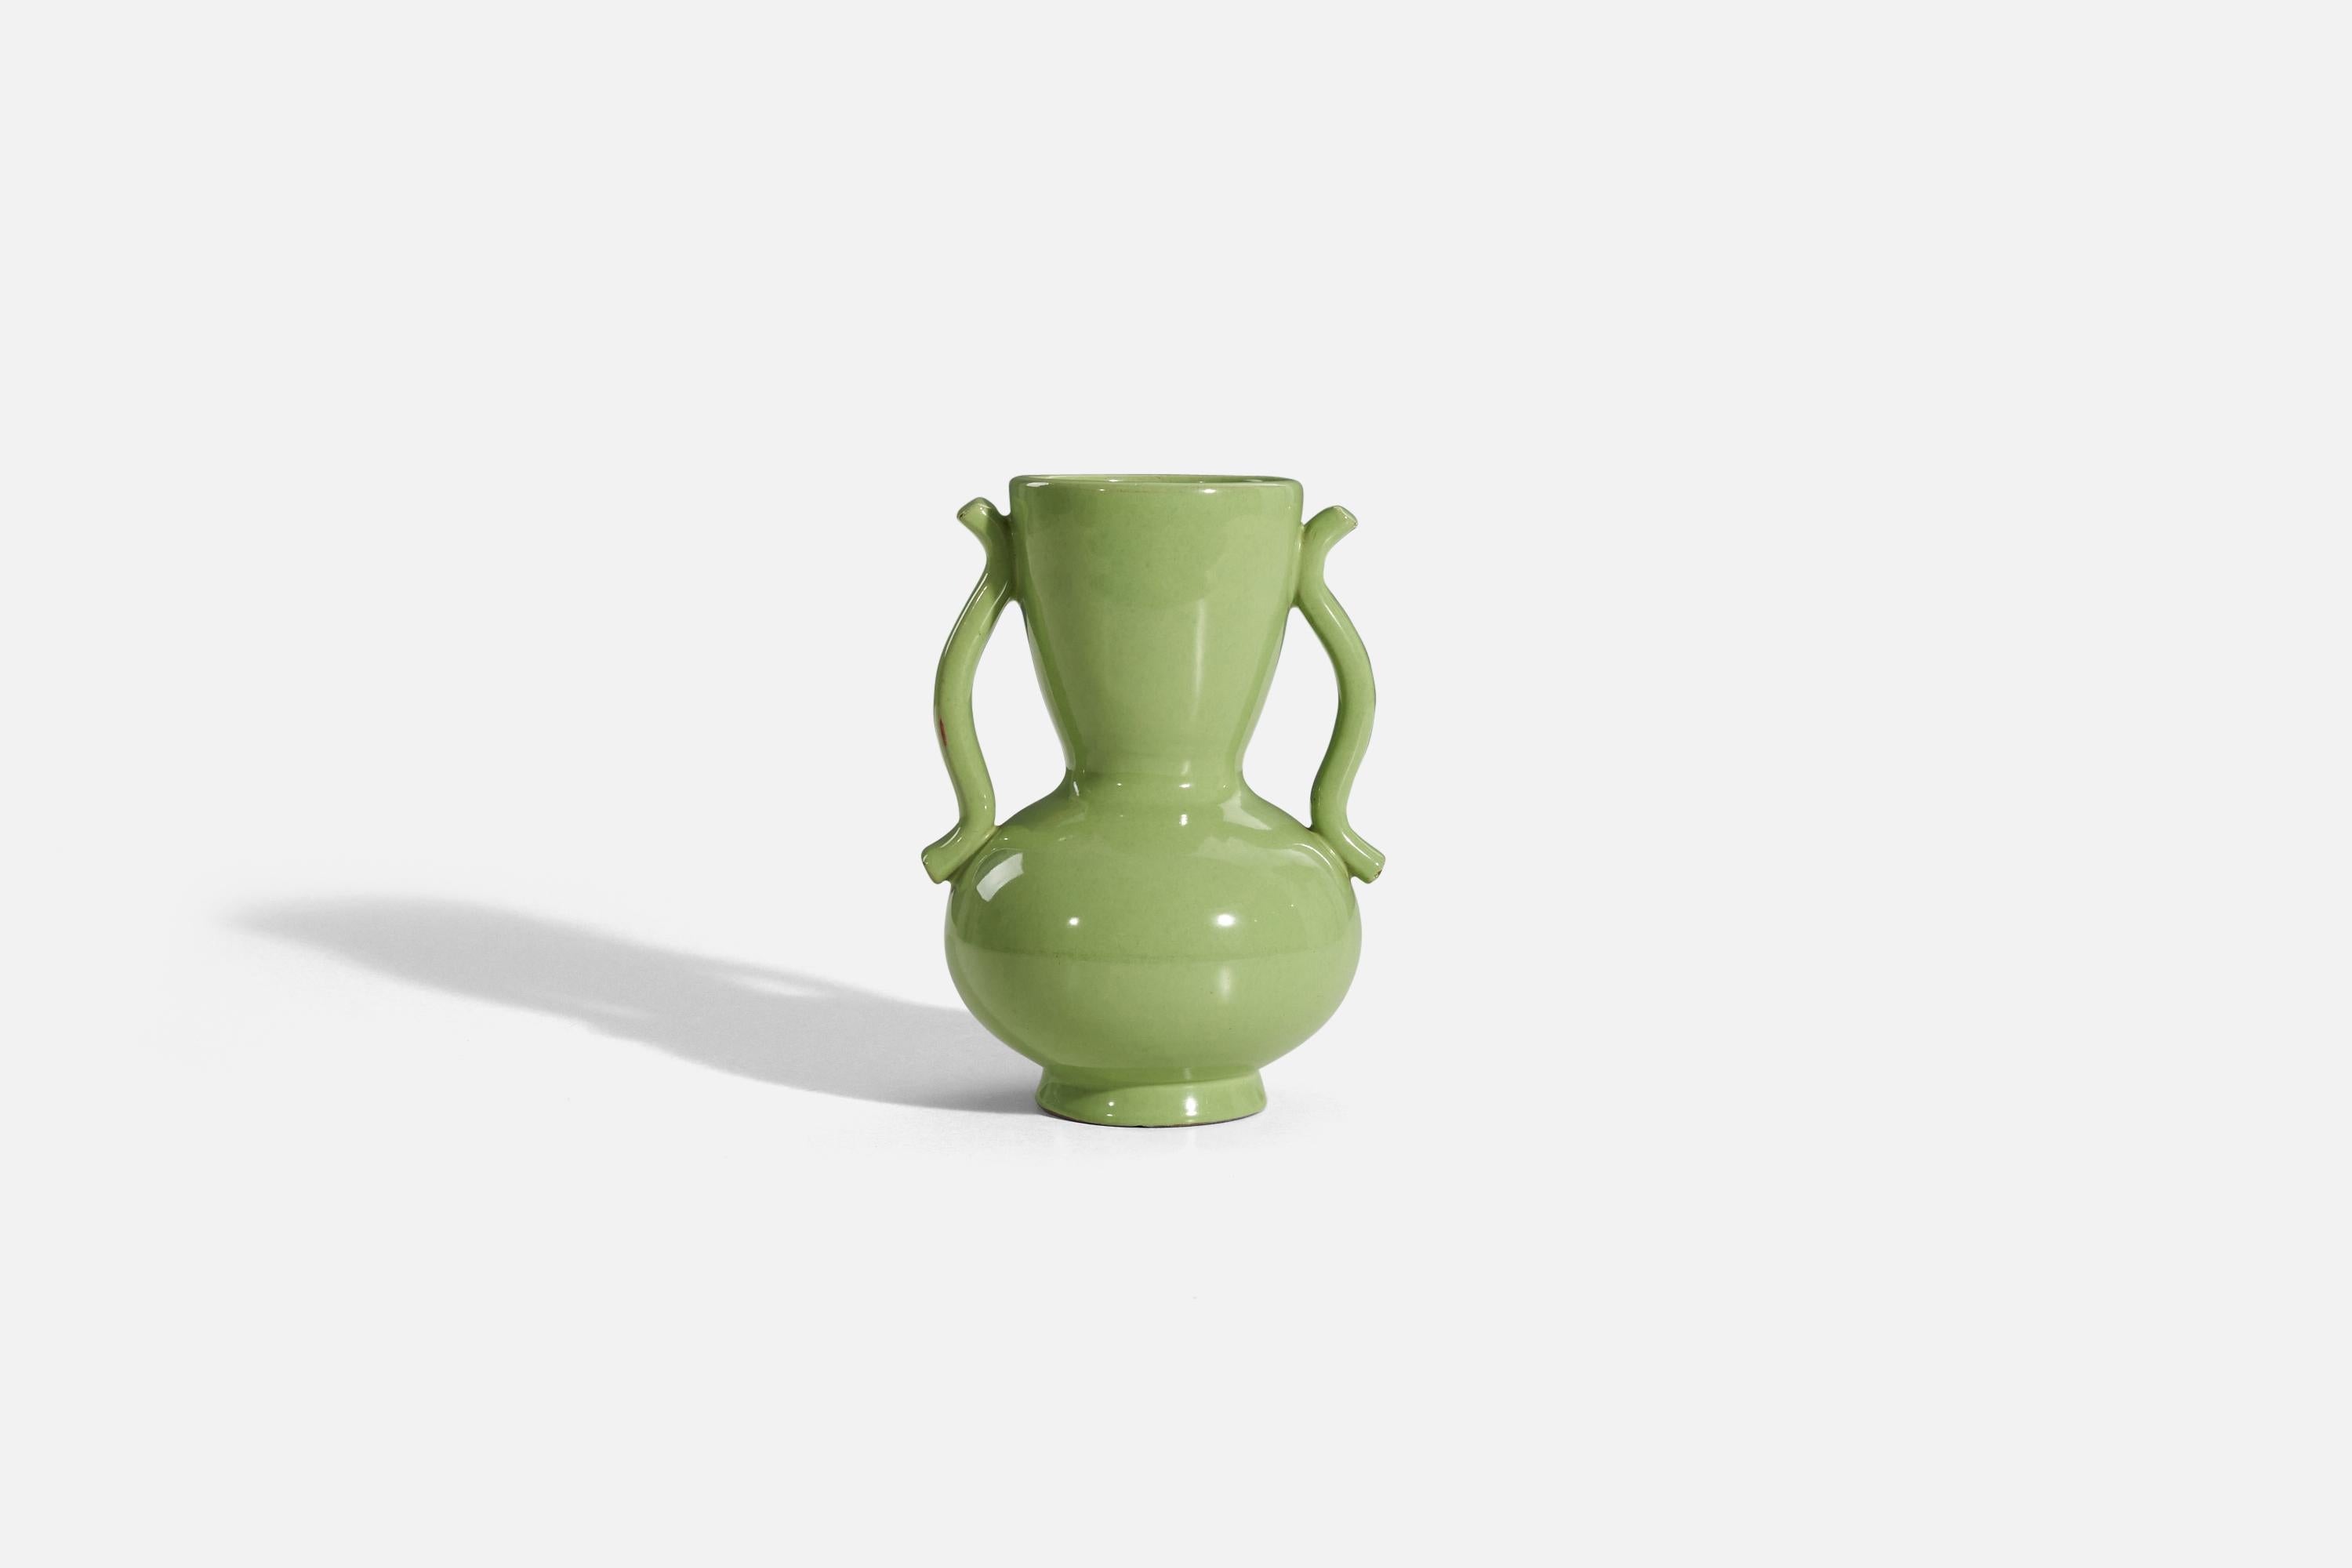 A green-glazed earthenware vase designed by Anna-Lisa Thomson and produced by Upsala-Ekeby, Sweden, 1940s. 

